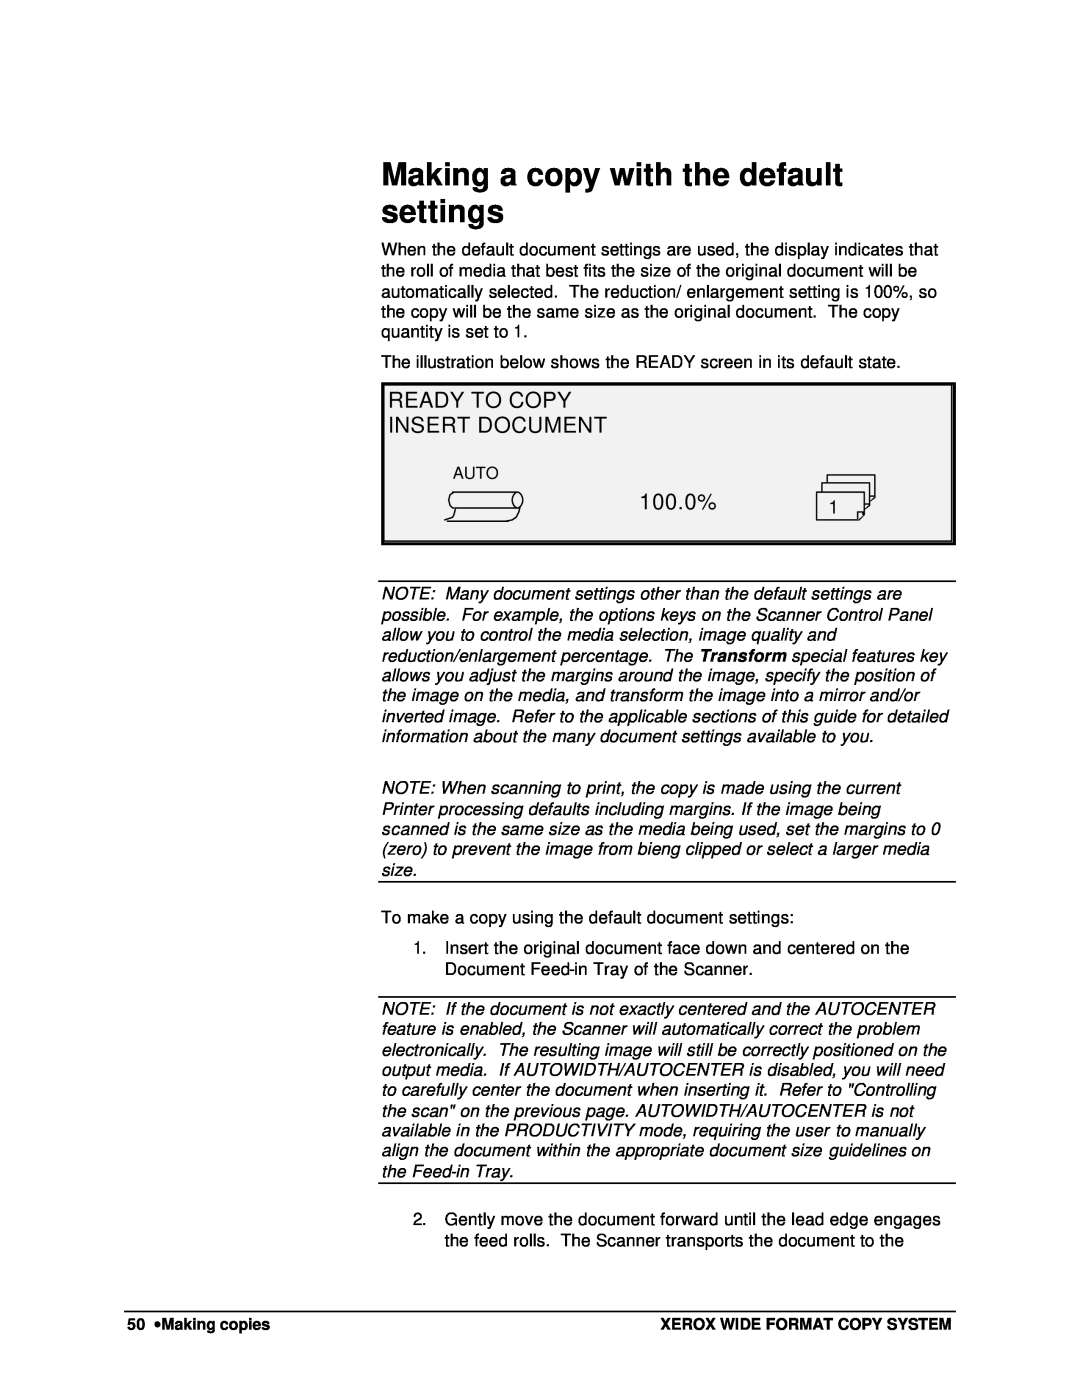 Xerox 8825, 8850, 8830, X2 manual Making a copy with the default settings, 100.0%1, Ready To Copy Insert Document 